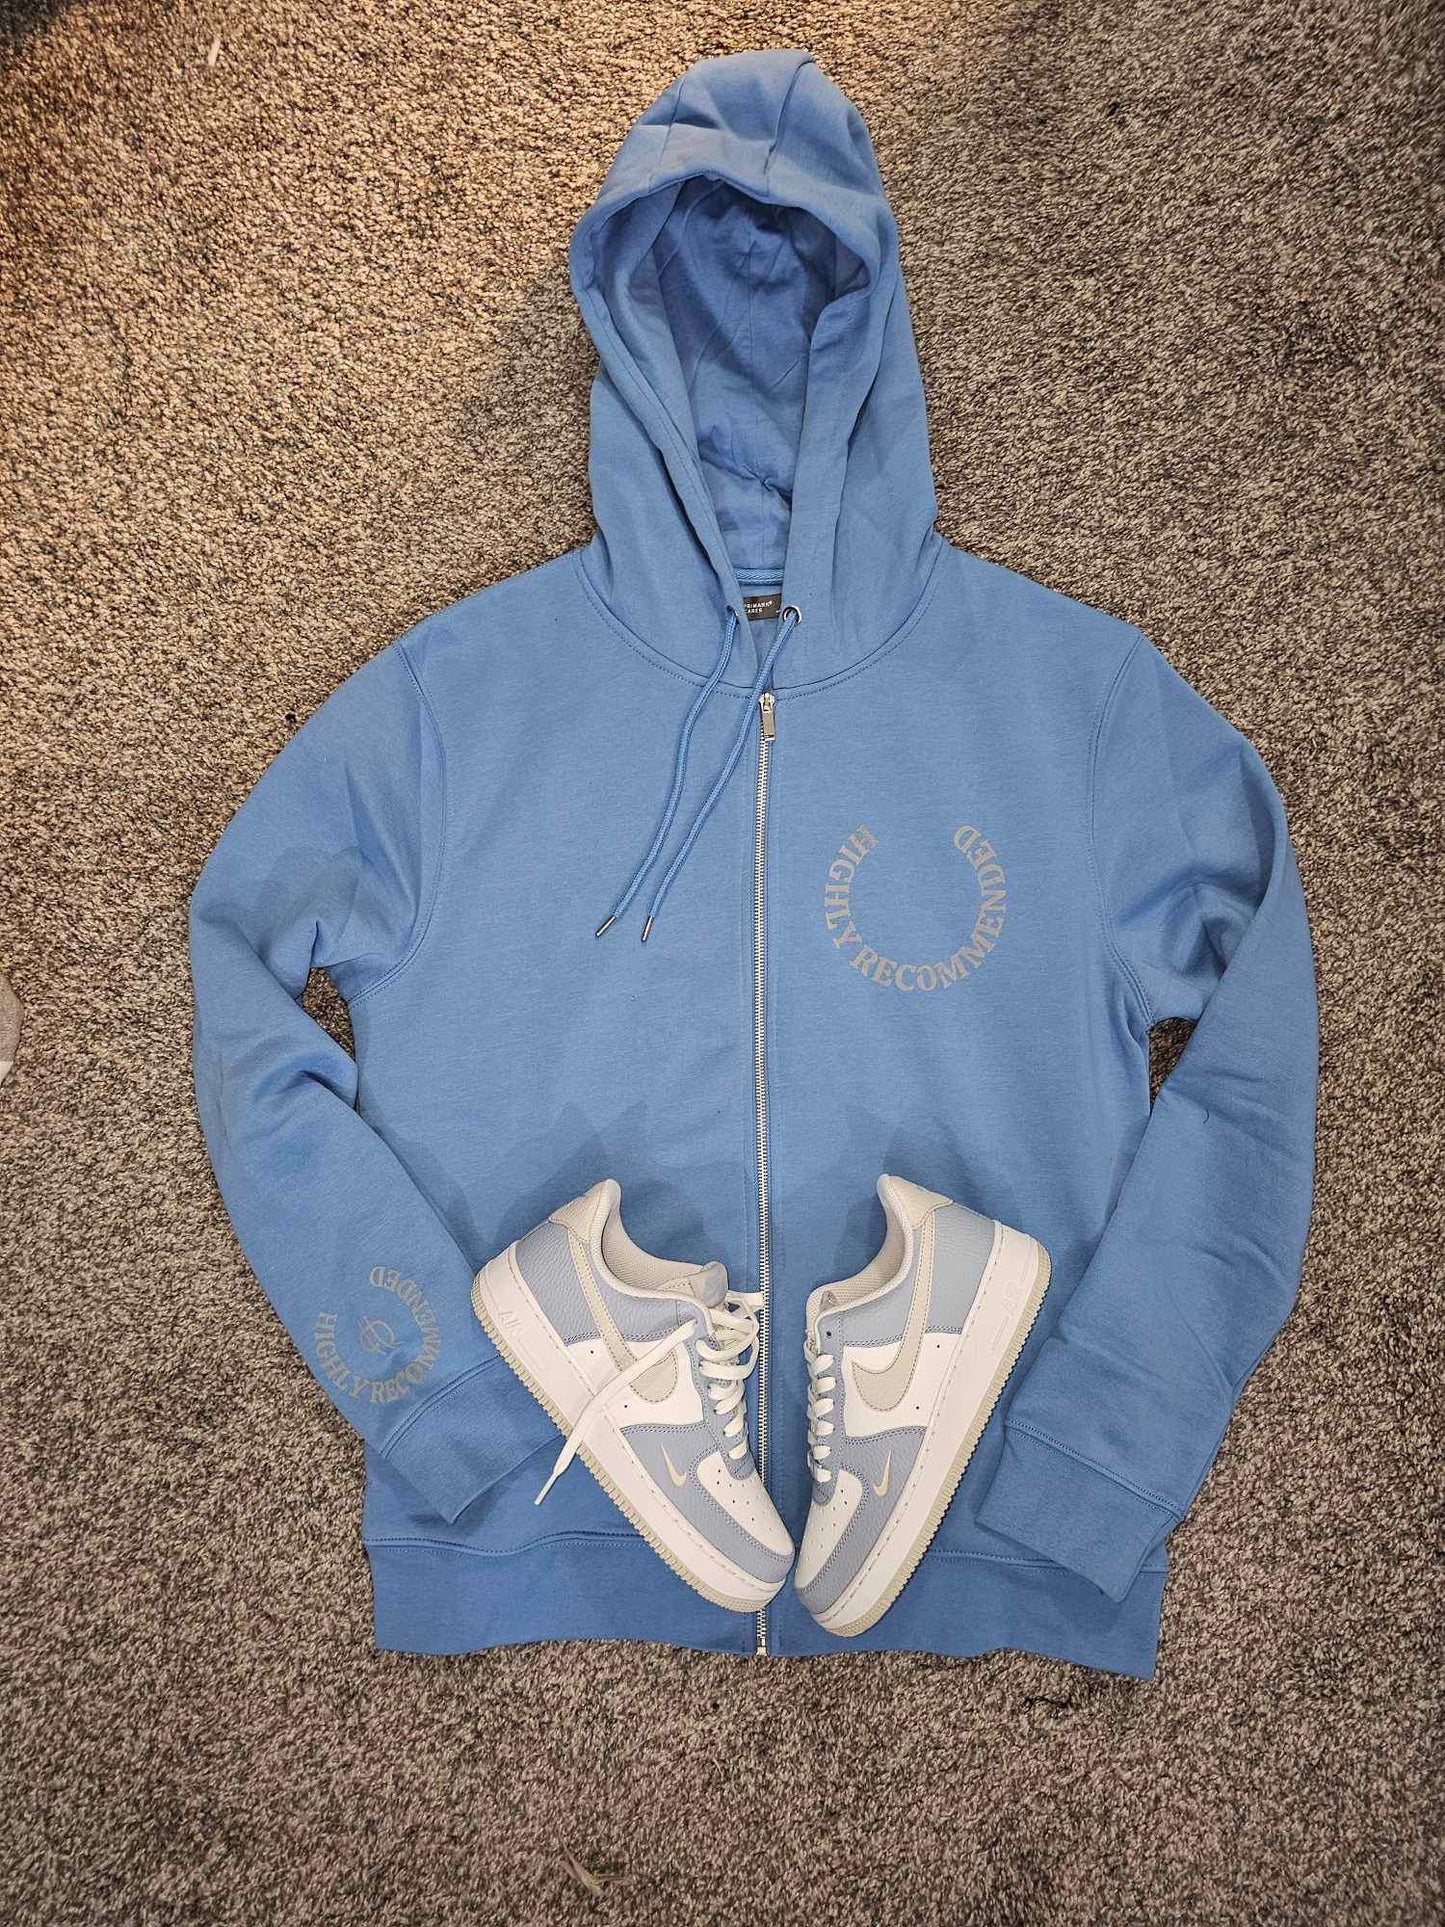 Carolina blue with gray logo Highly Recommended hoodie